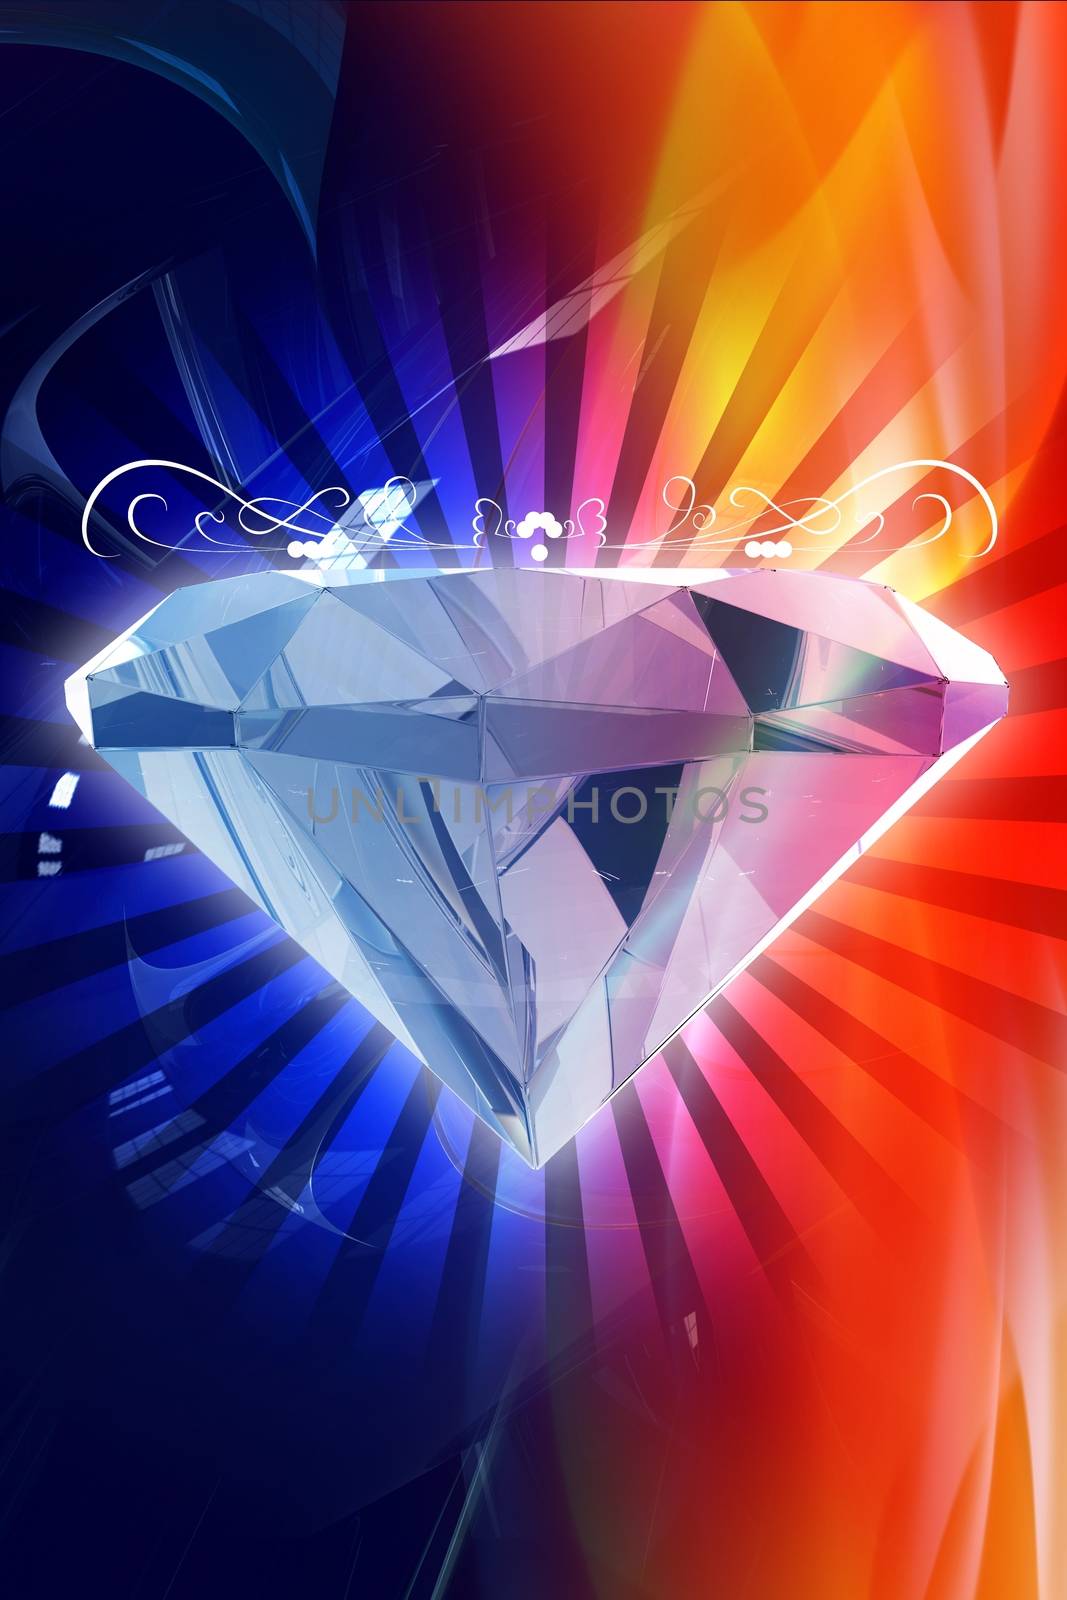 Colorful Diamond Background with Top and Bottom Copy Space. Blue-Red Flames Background and 3D Rendered Diamond in the Center. Vertical Design.